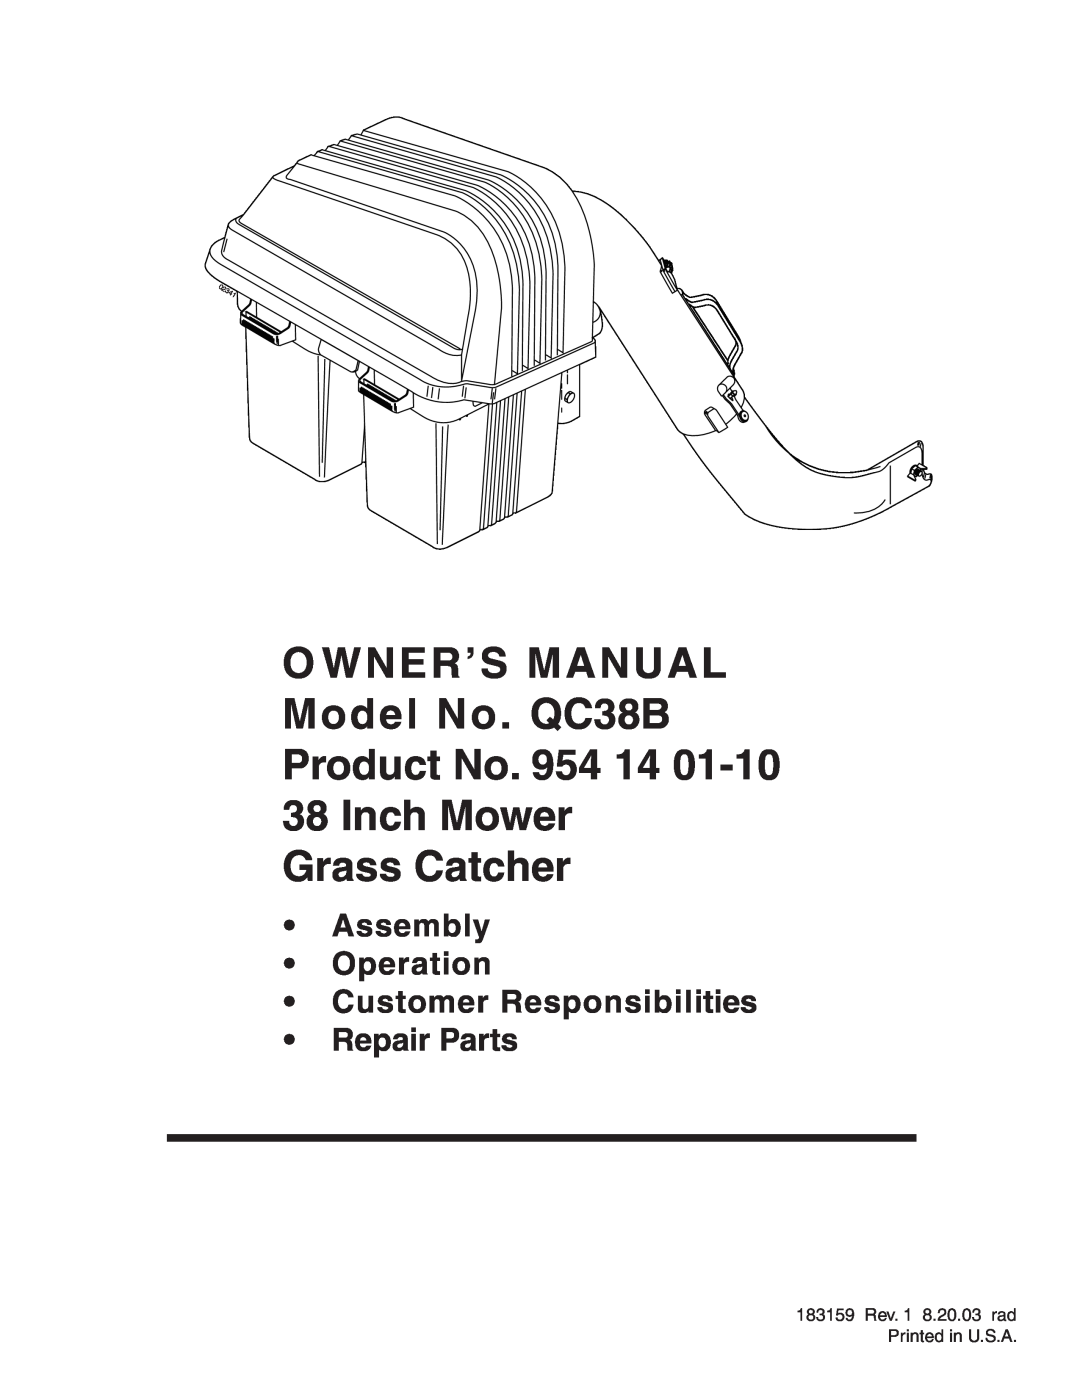 Poulan 954 14 01-10 owner manual O WNER’S MANUAL Model No. QC38B Product No. 954 14 38 Inch Mower, Grass Catcher, freq 